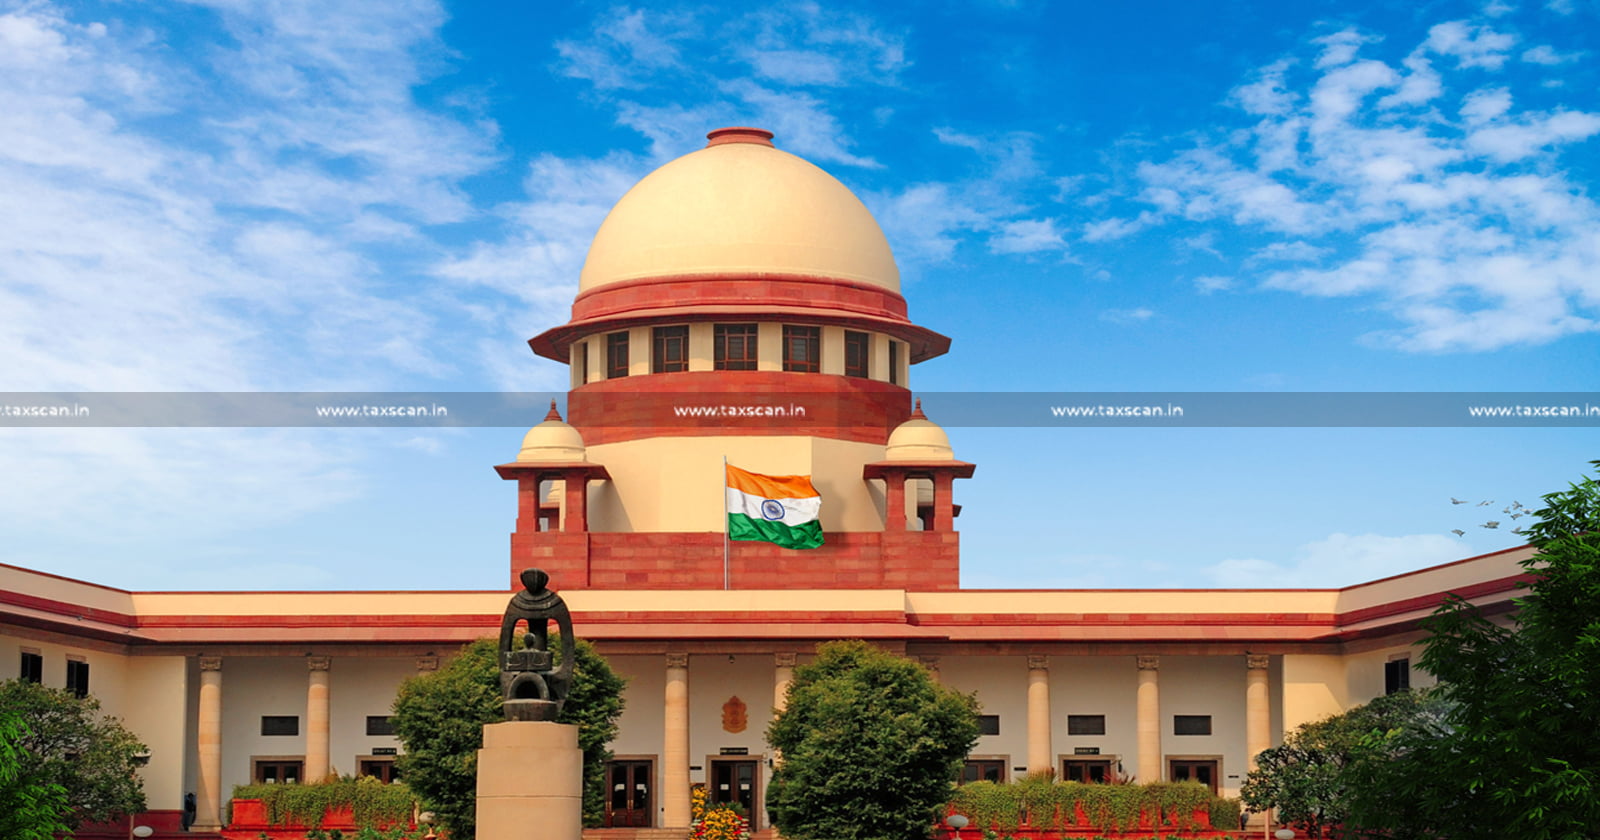 income tax department - special leave petition - supreme court - income tax - Tax effect below Rs 10 lakhs - taxscan